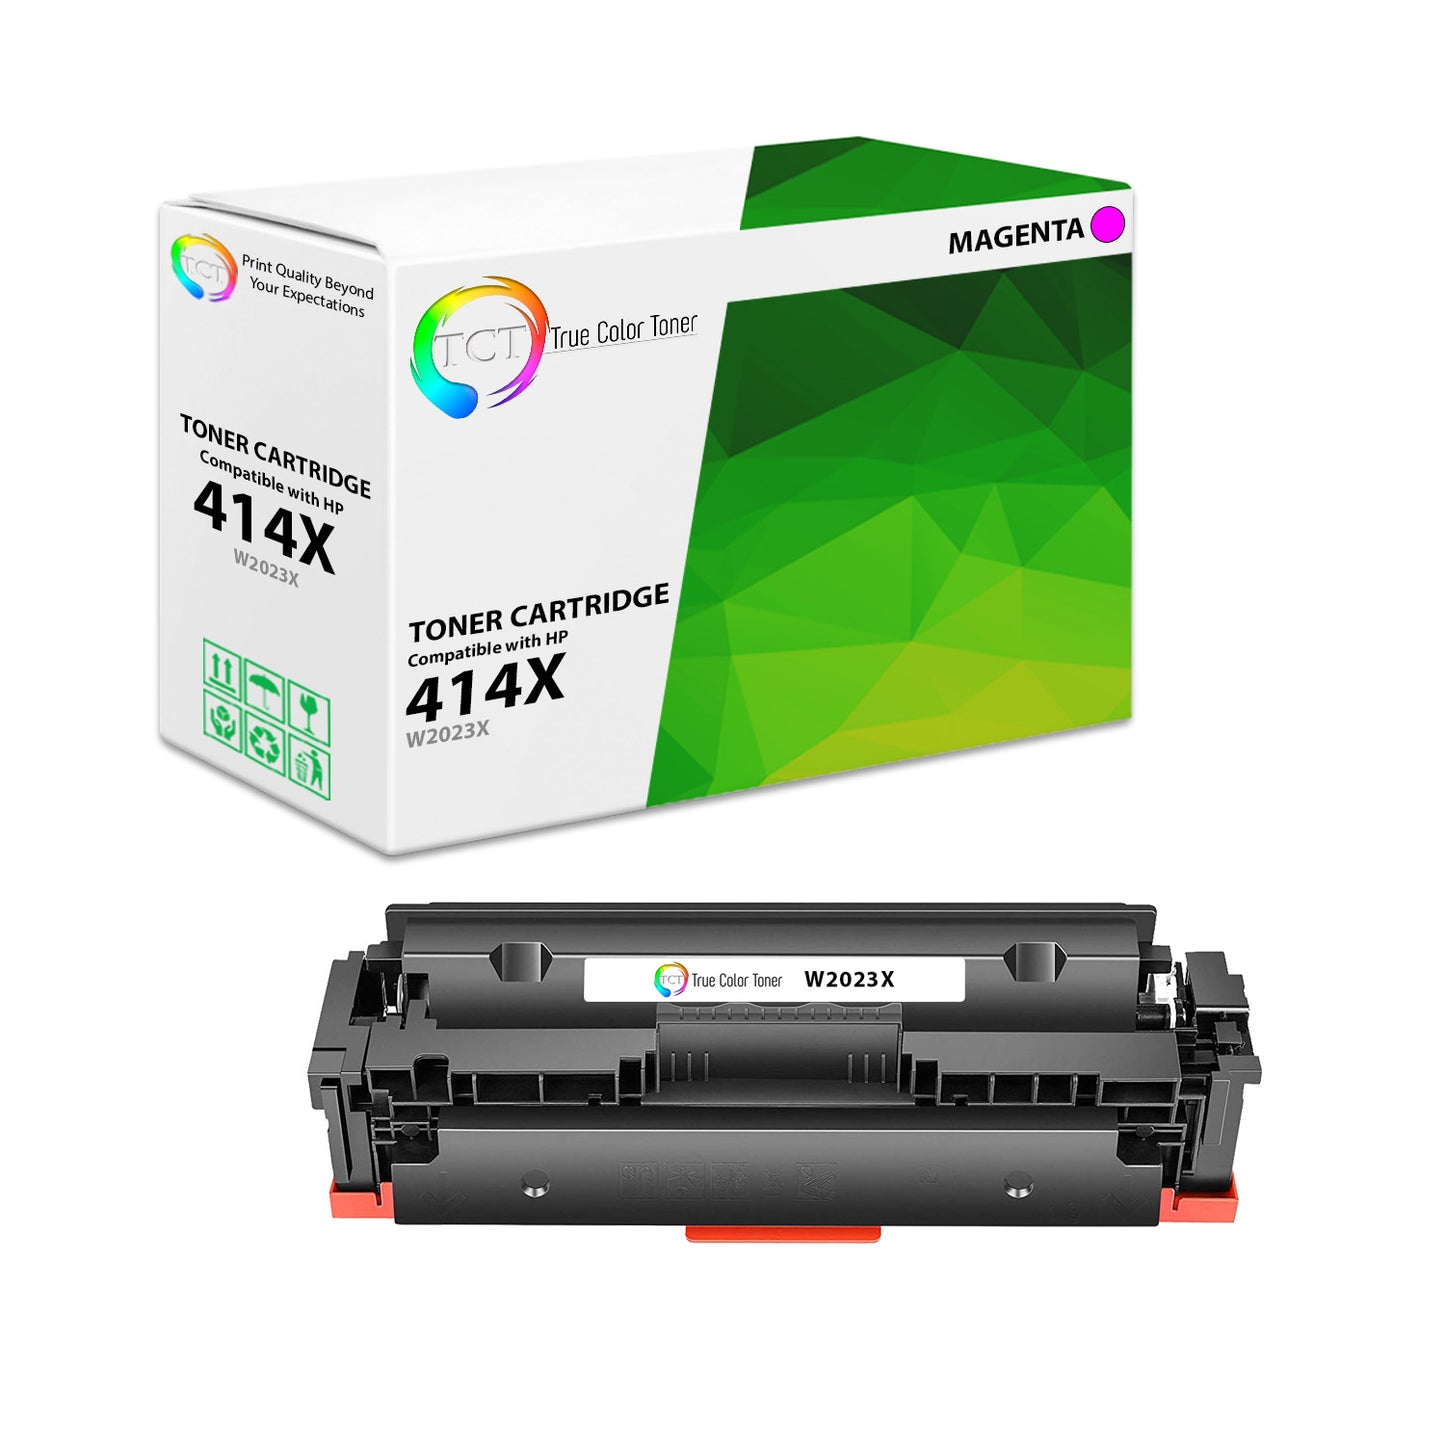 TCT Compatible High Yield Toner Cartridge Replacement for the HP 414X Series - 1 Pack Magenta